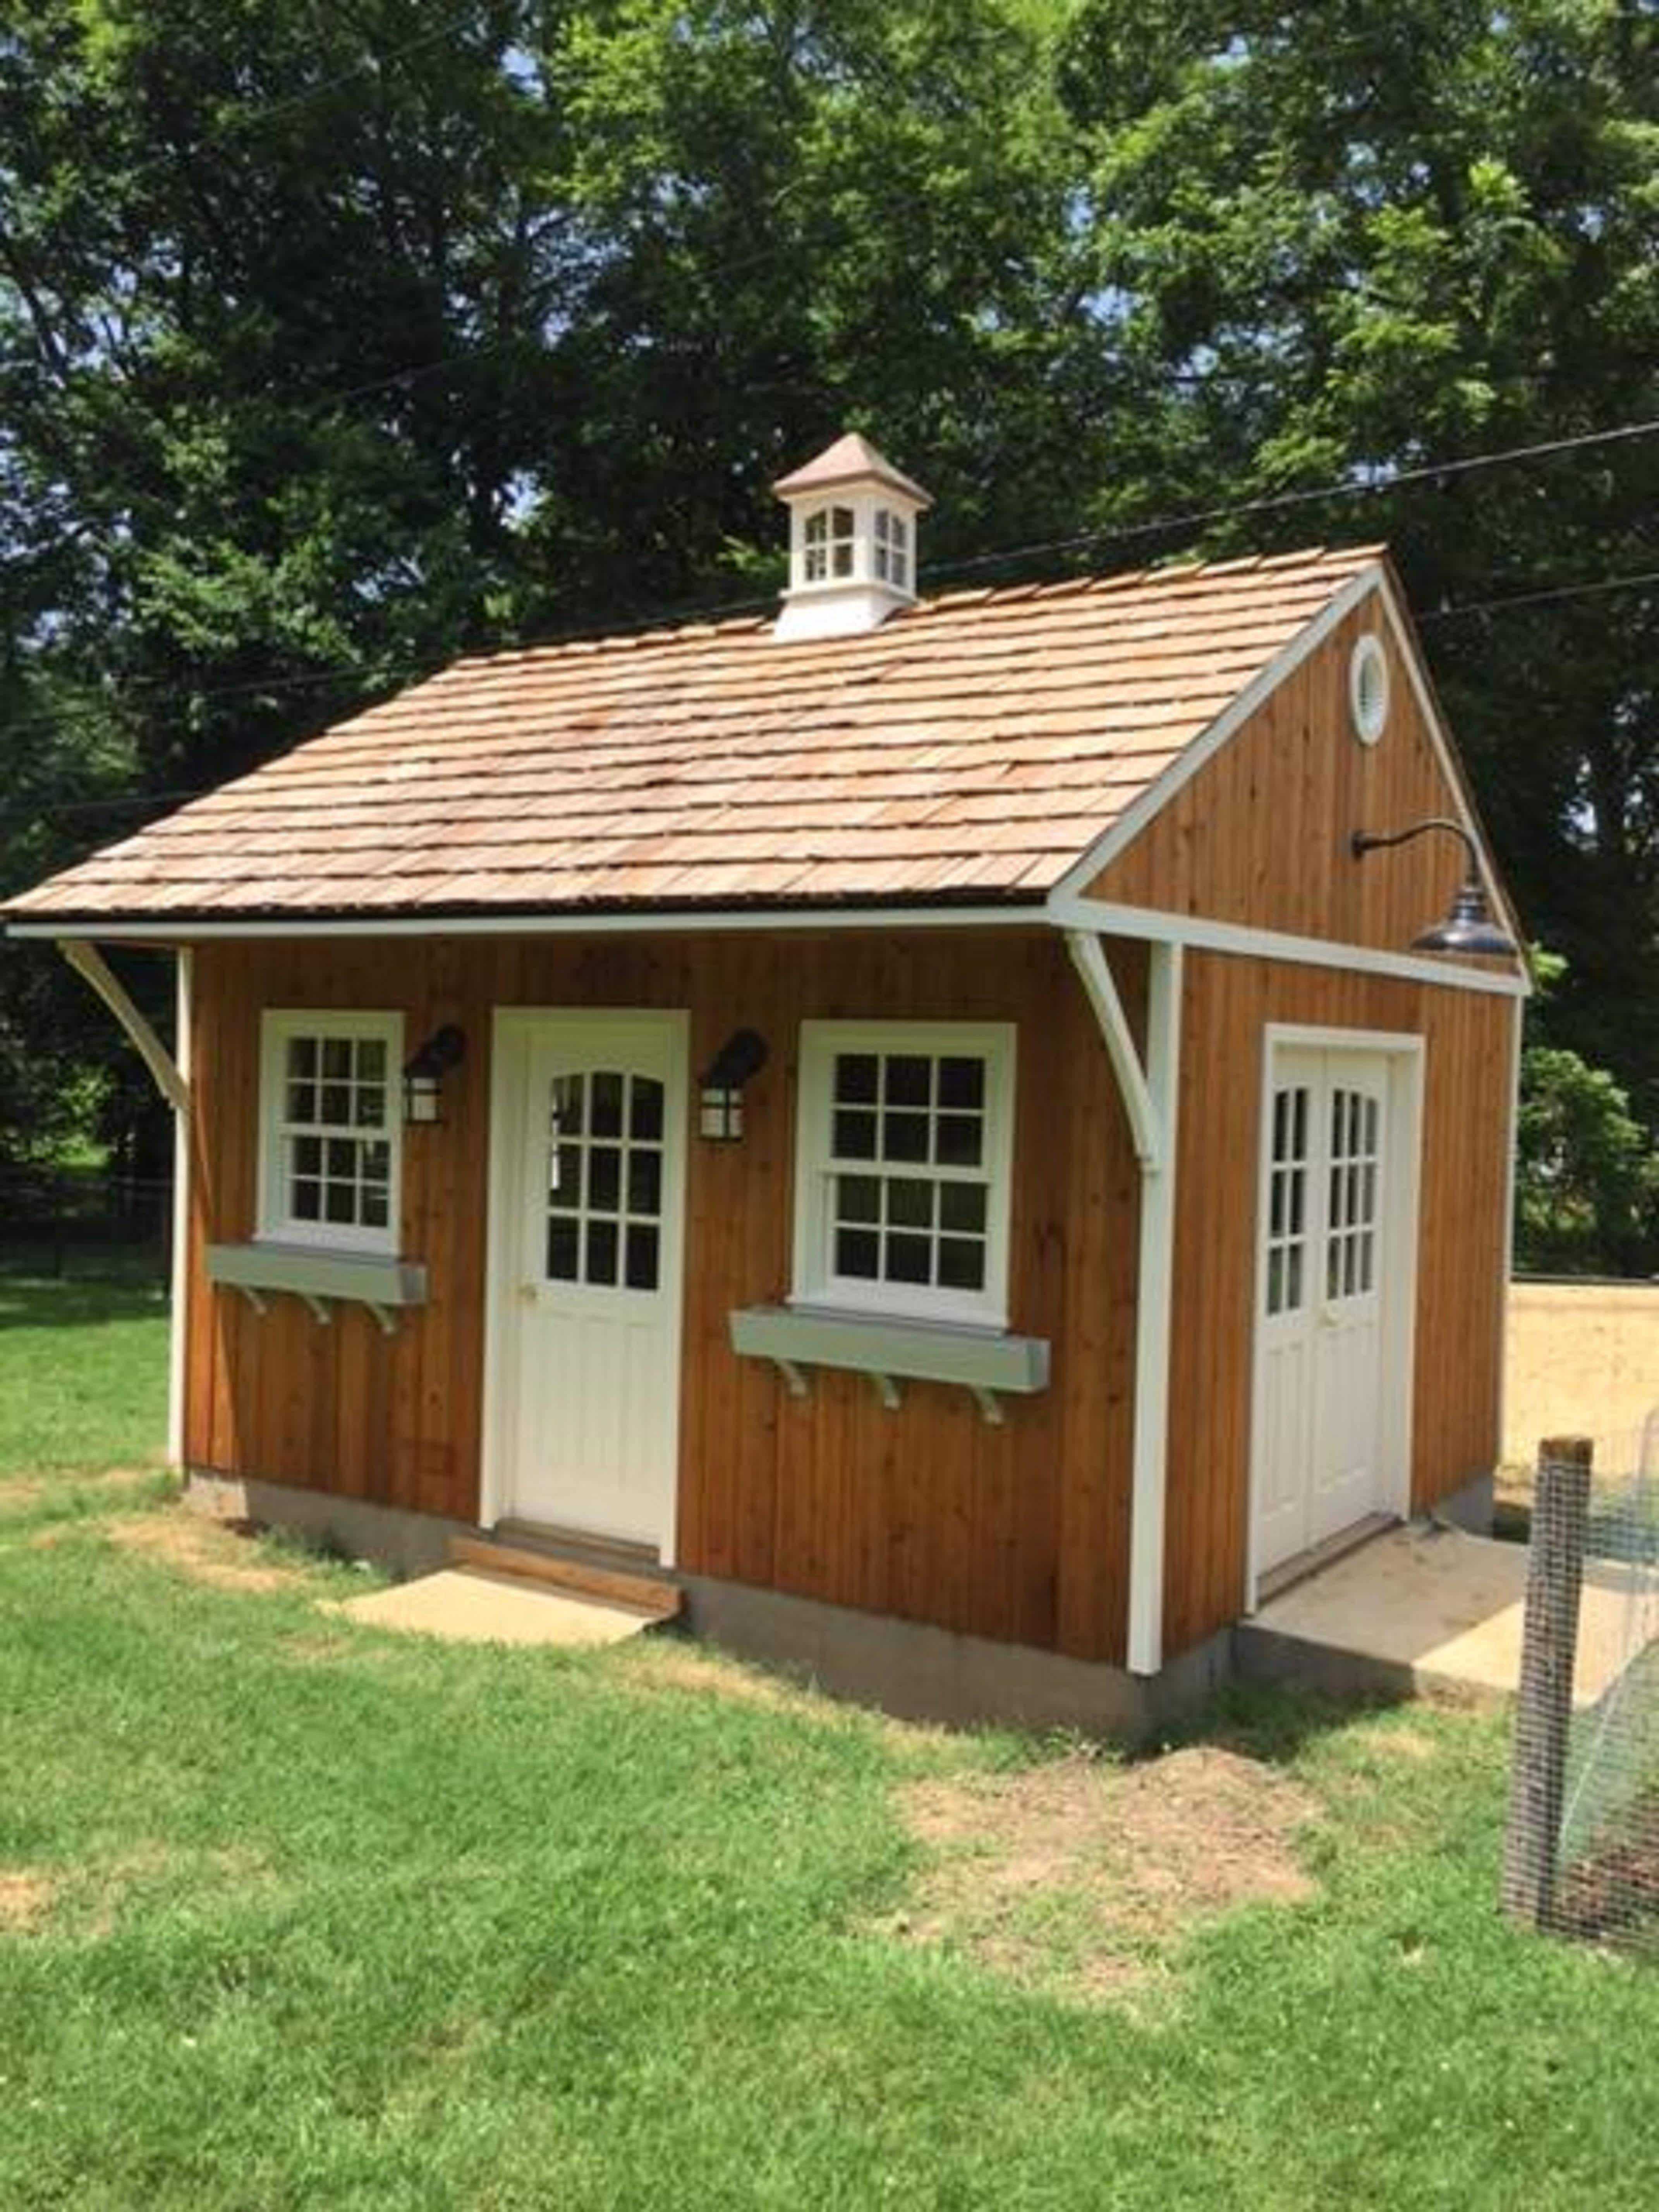 Glen Echo cabins 16x16 with windowed cupola in Nashville Tennesse. ID number  206128-1